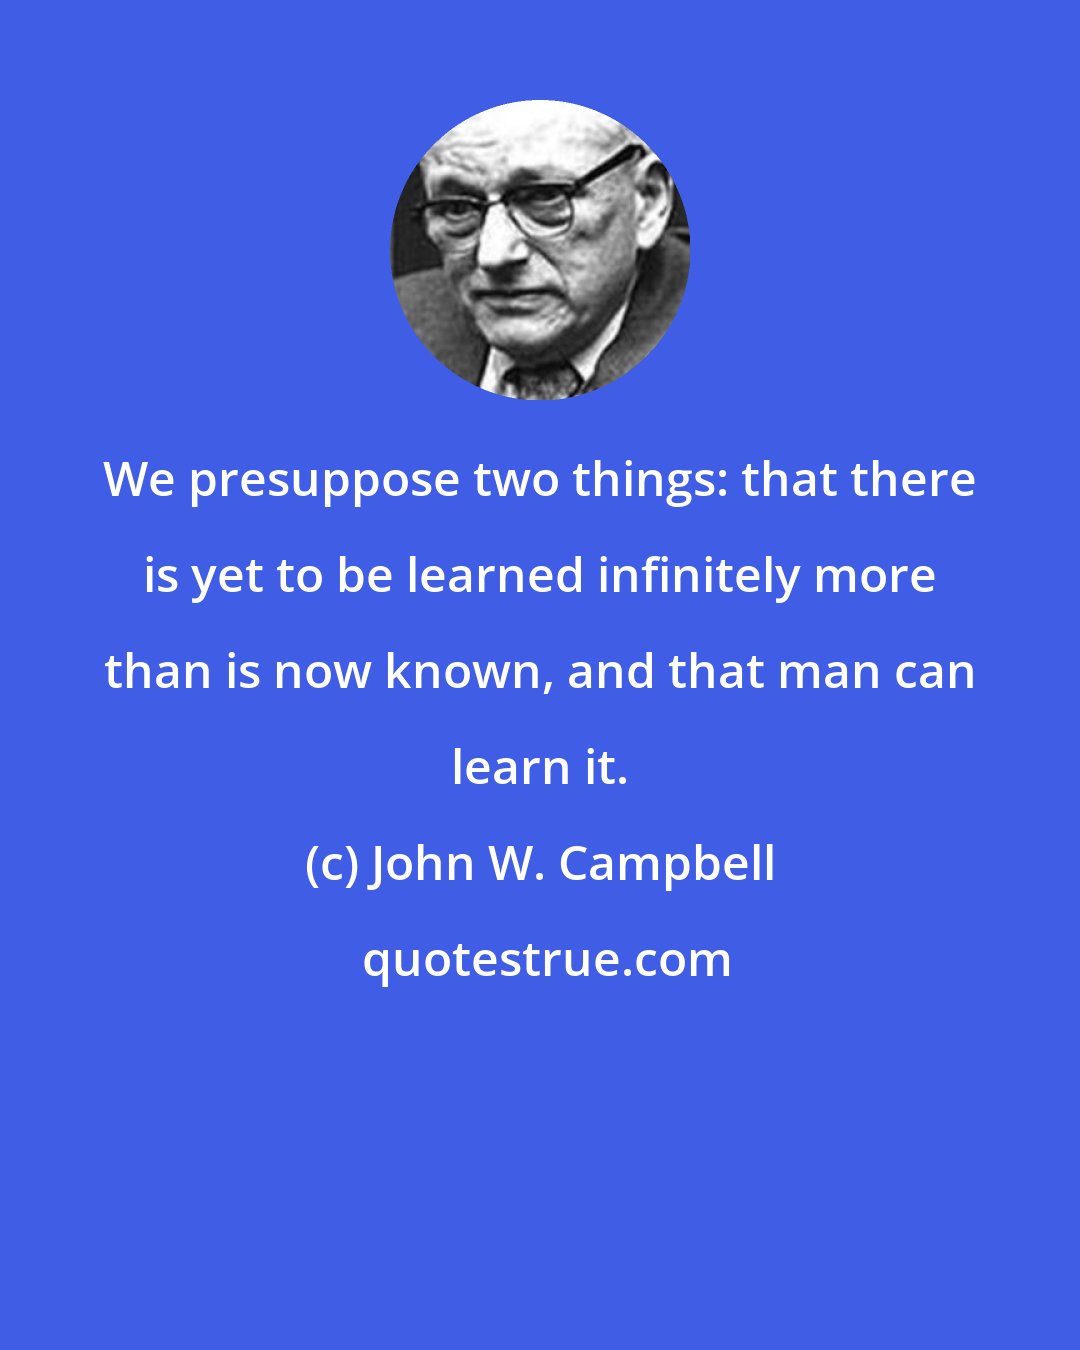 John W. Campbell: We presuppose two things: that there is yet to be learned infinitely more than is now known, and that man can learn it.